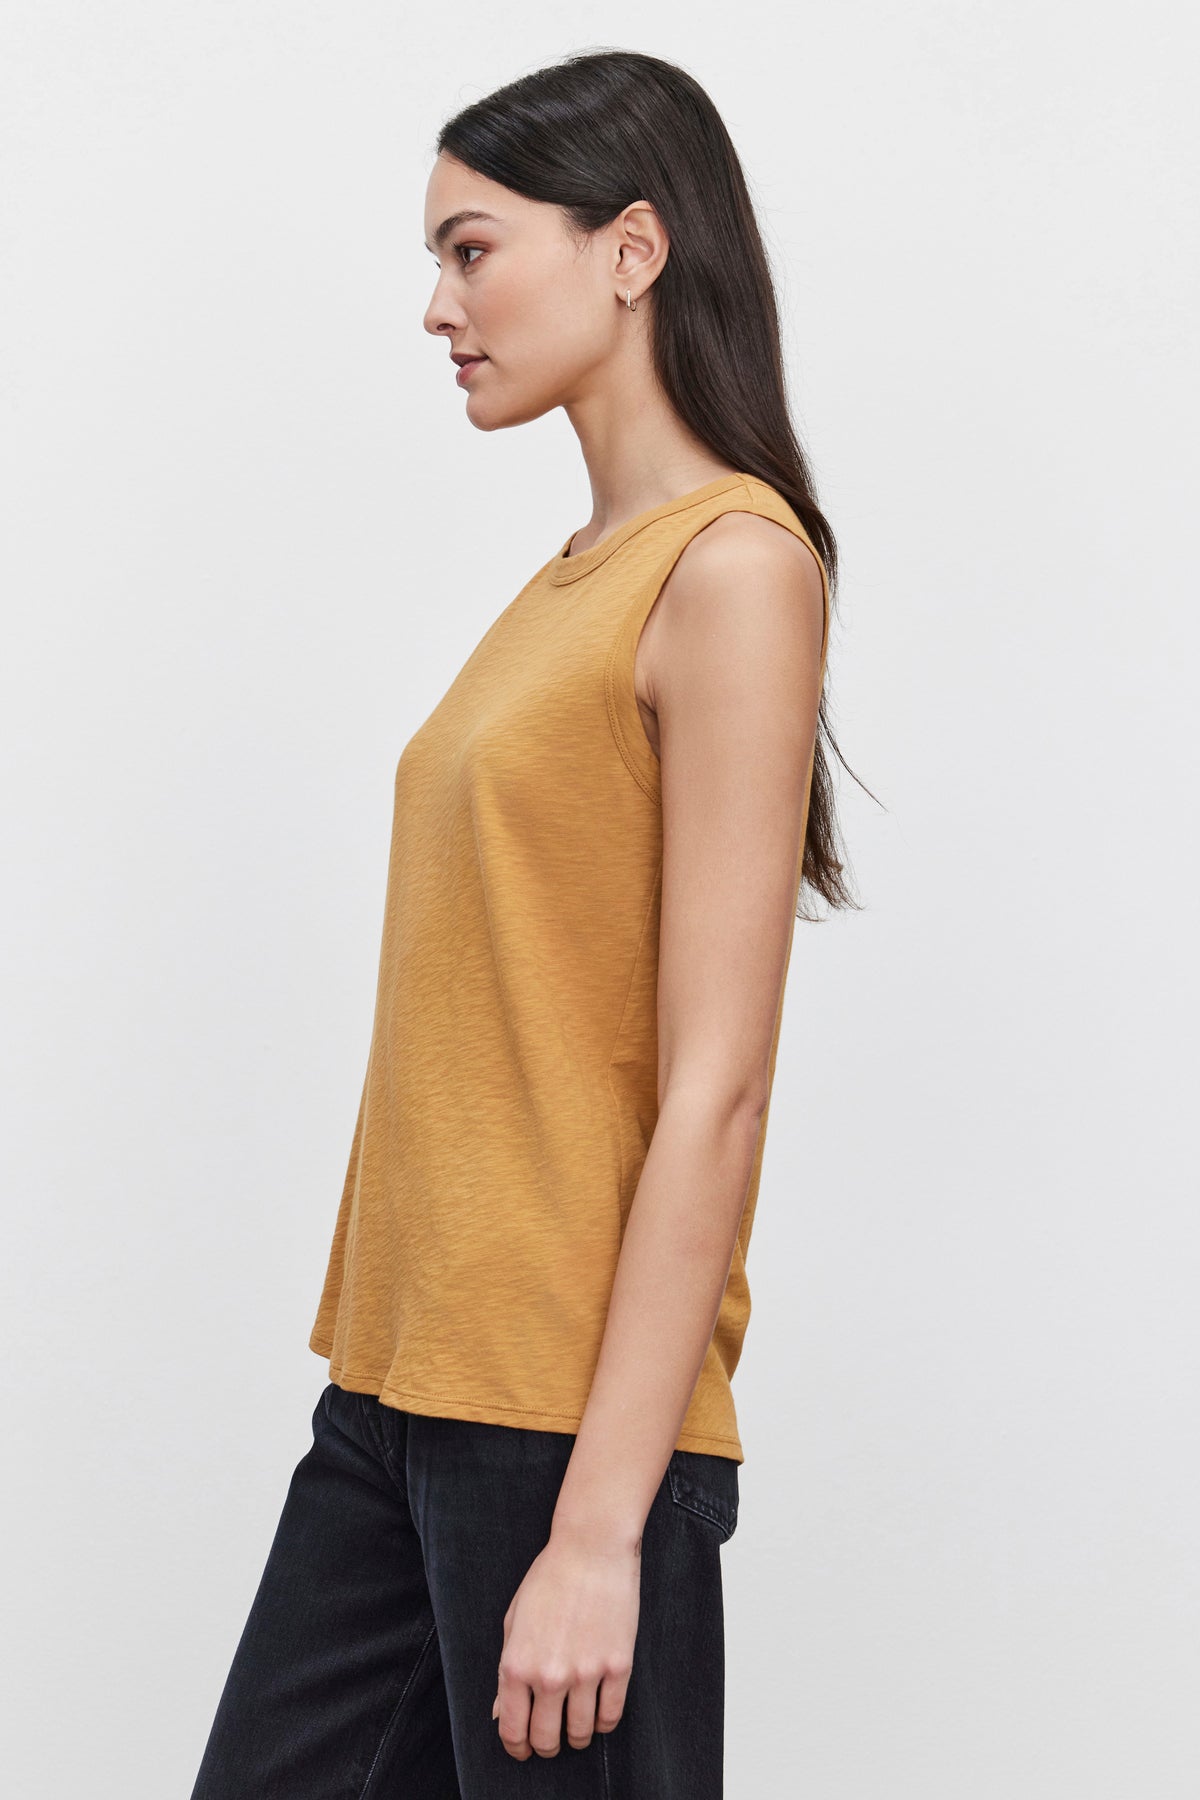 A woman with long, dark hair stands in profile, wearing the sleeveless TAURUS TANK TOP from Velvet by Graham & Spencer, which is made from cotton slub and comes in a mustard color. She pairs it with dark pants against a plain white background. The top's fabric and design make it an essential piece for any wardrobe.-37629572710593